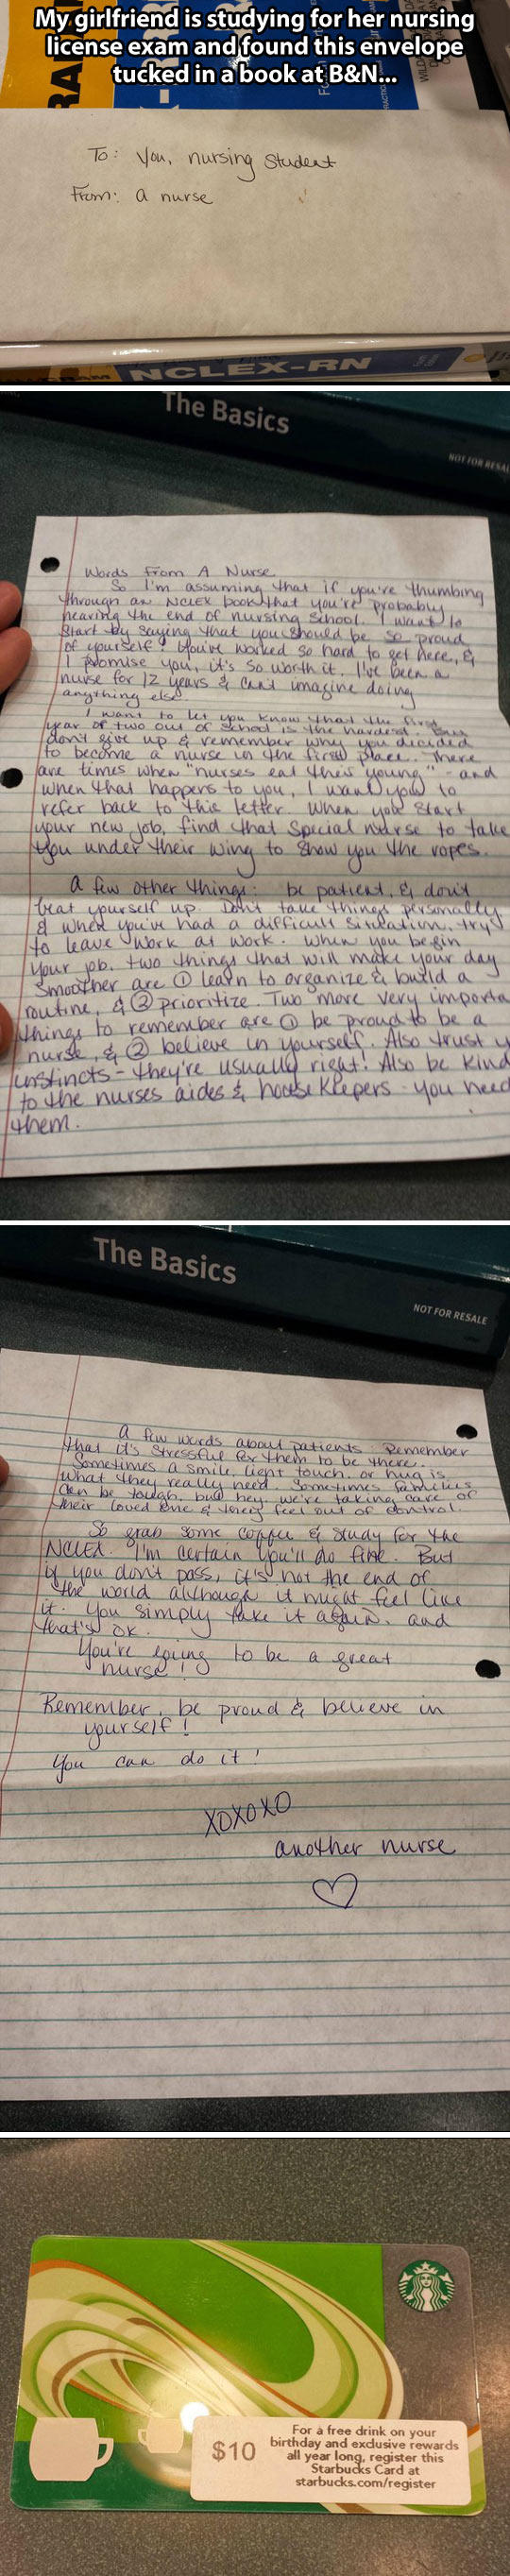 Student Buys Book, Finds An Unexpected Surprise Inside... -   Misc